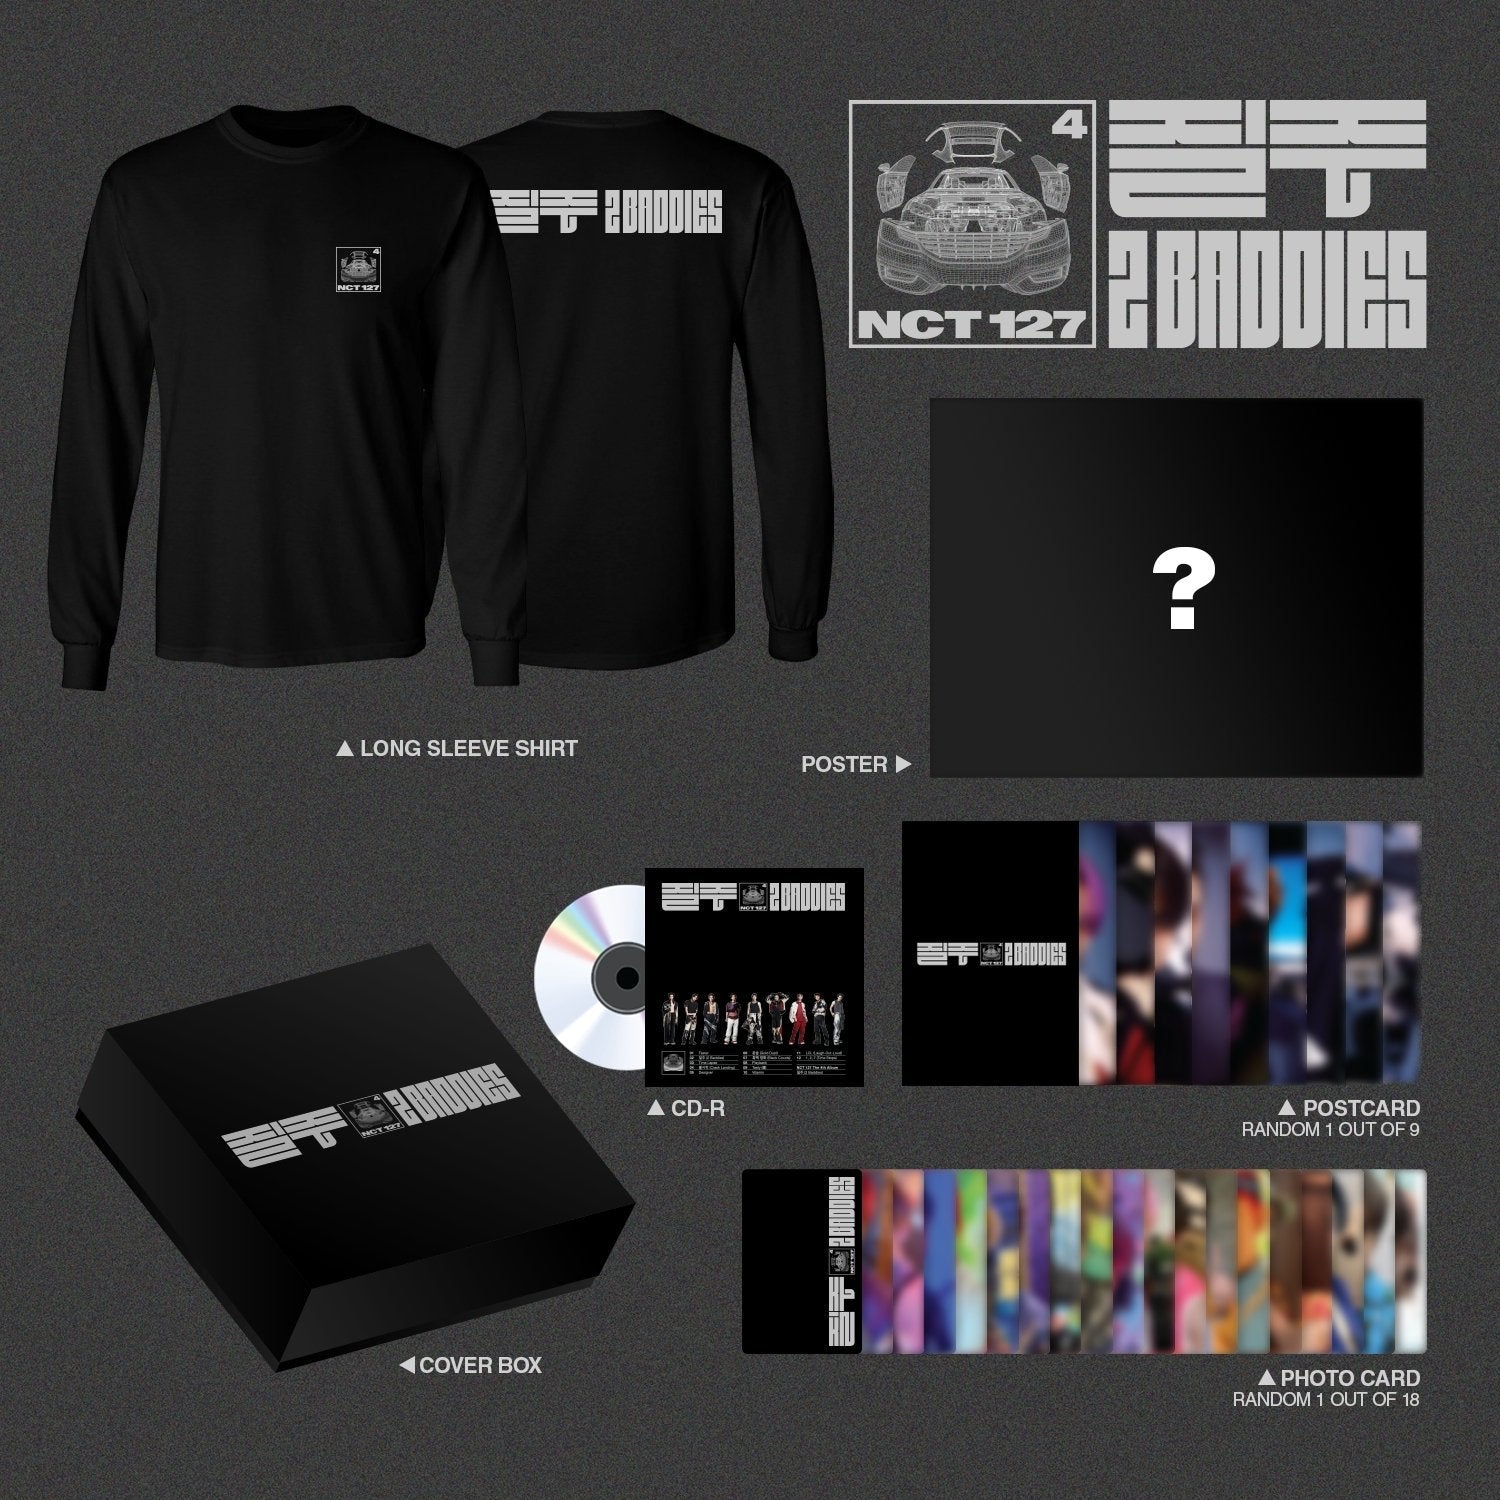 [SGS] NCT 127 The 4th Album ‘2 Baddies’ Long Sleeve T-Shirts Deluxe Box Set + Extra Photocard